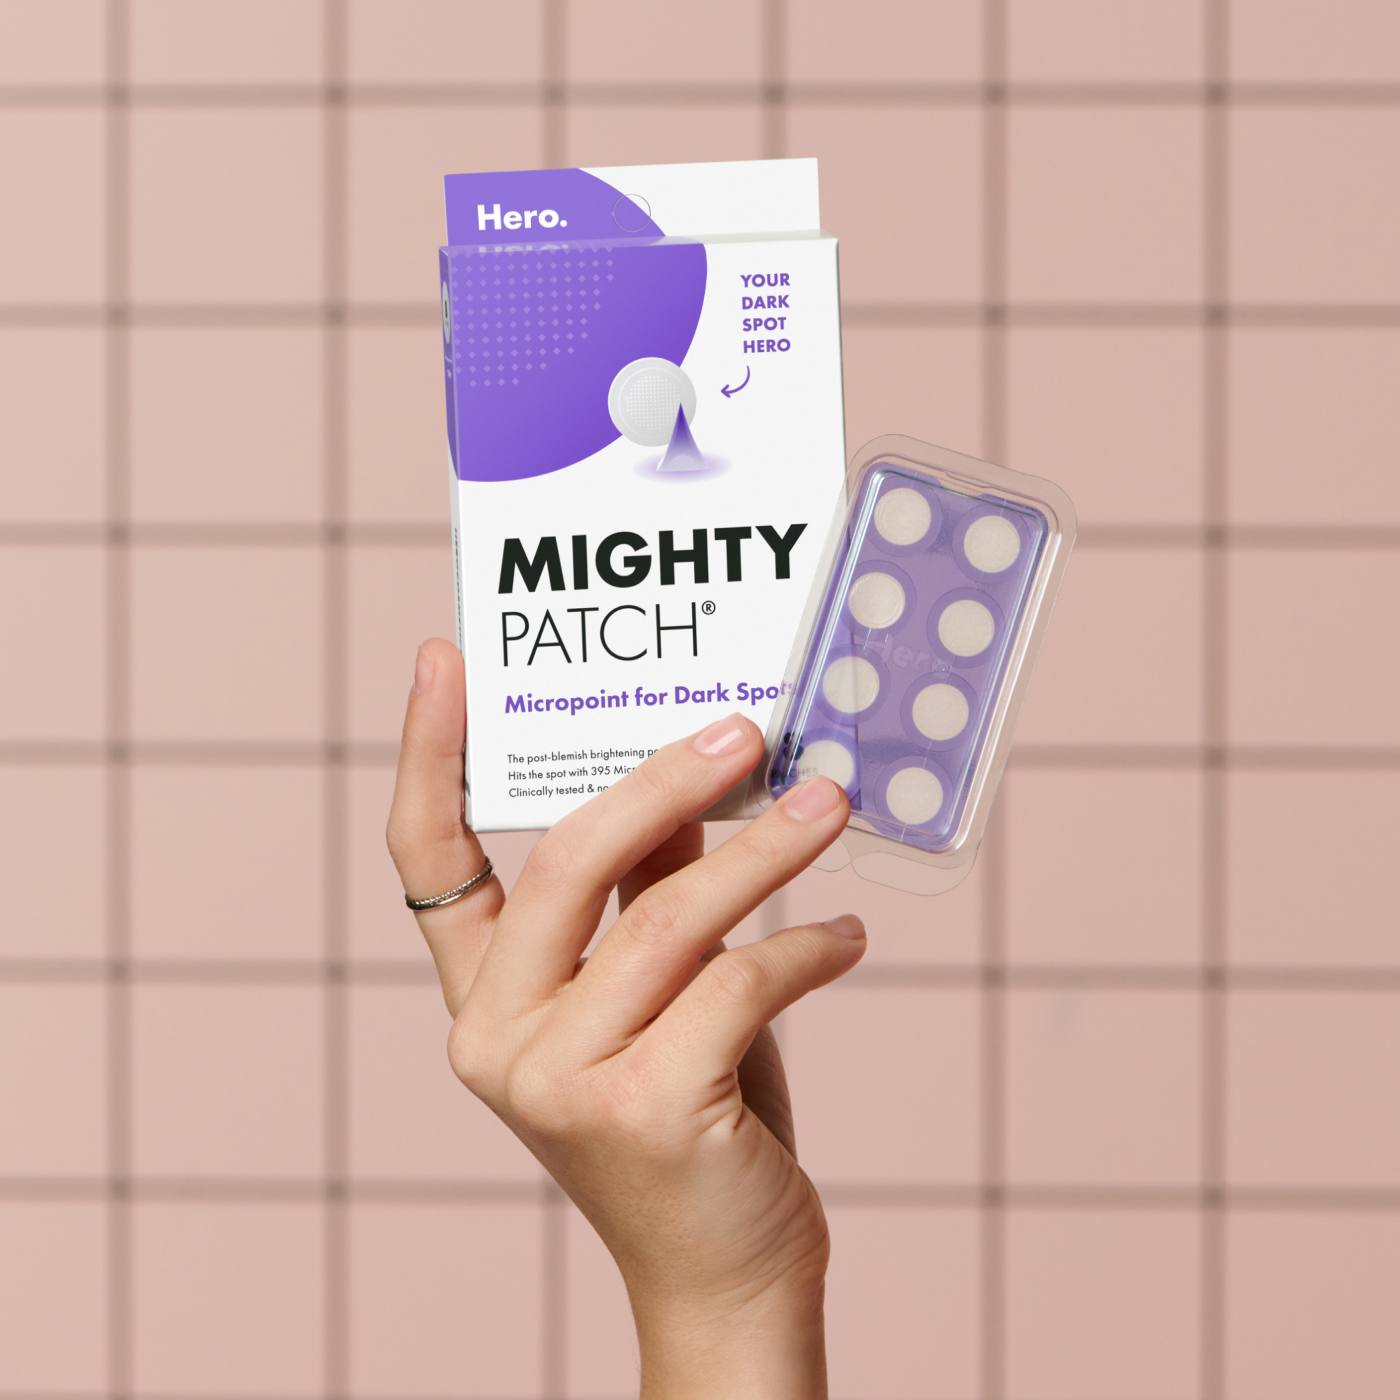 Mighty Patch Micropoint for Dark Spots